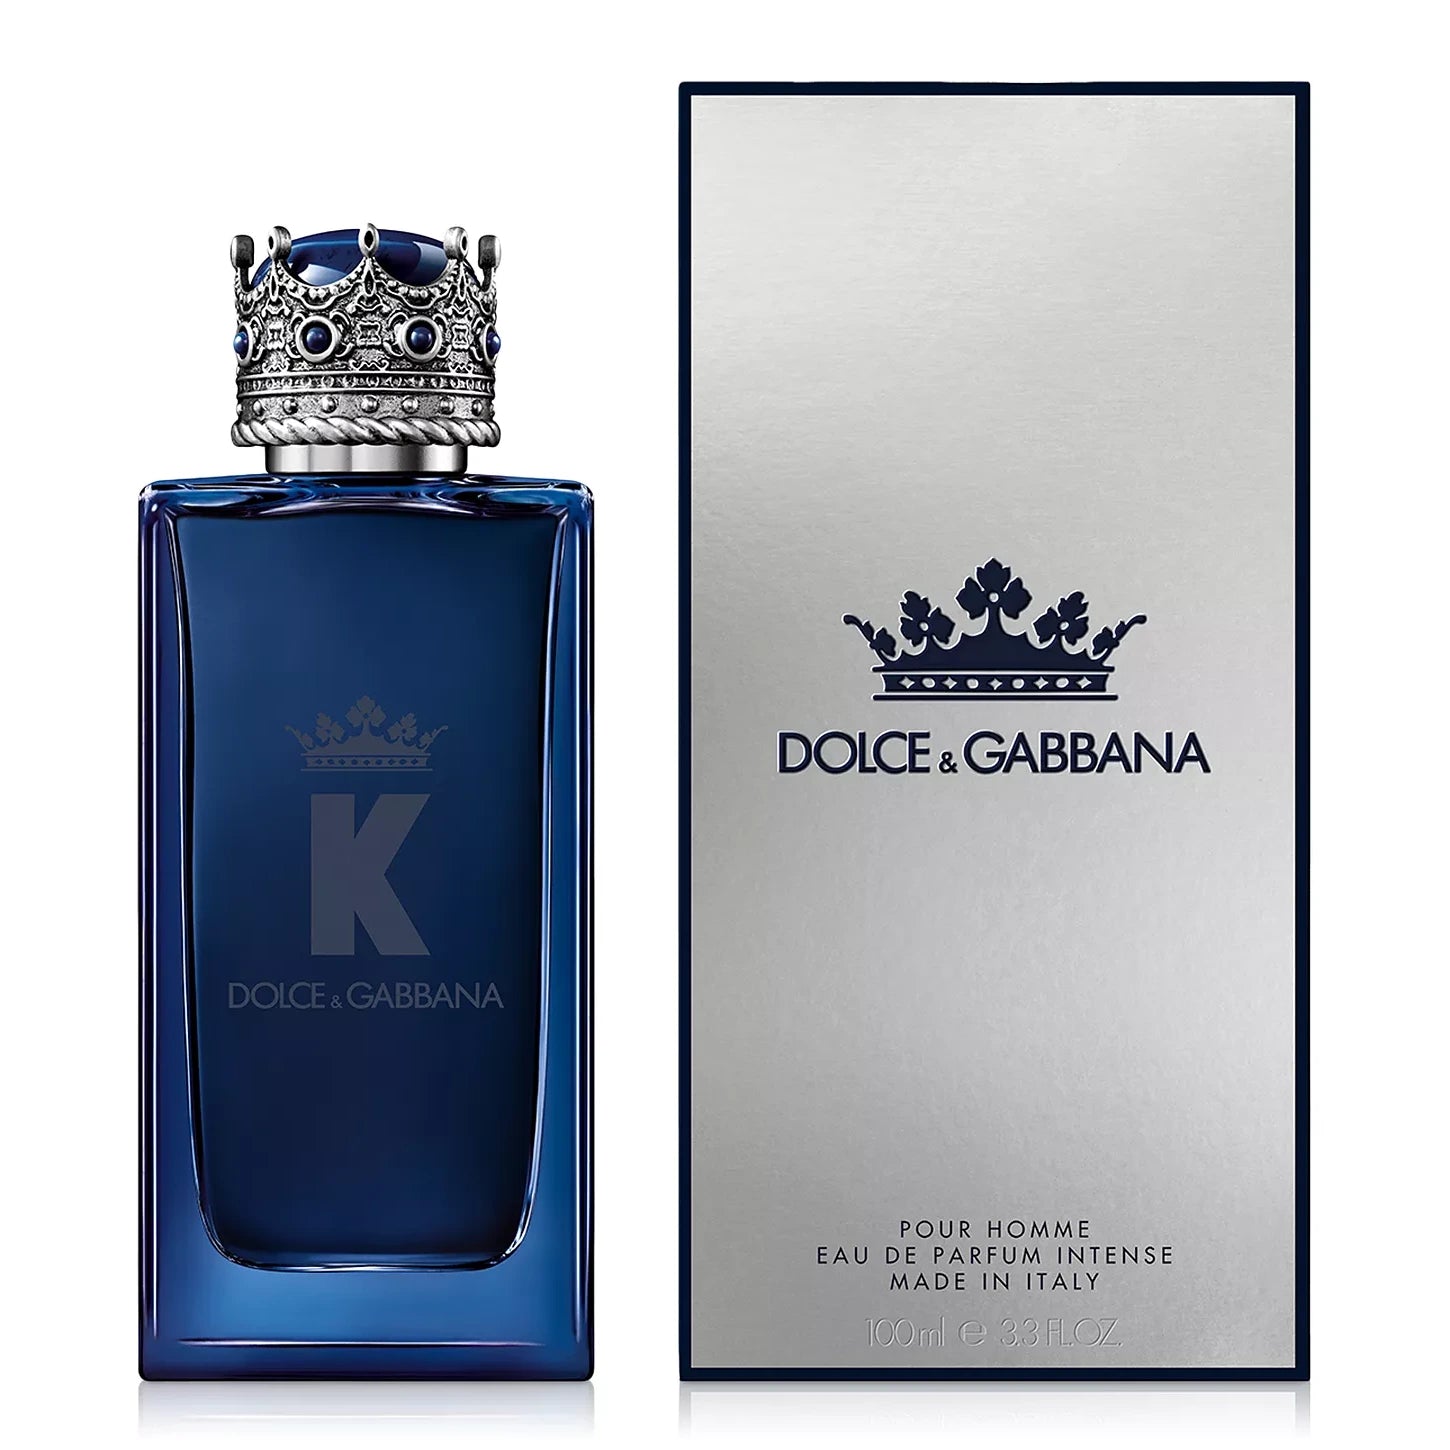 DOLCE＆GABBANA　KING　made in ITALYイタリア製